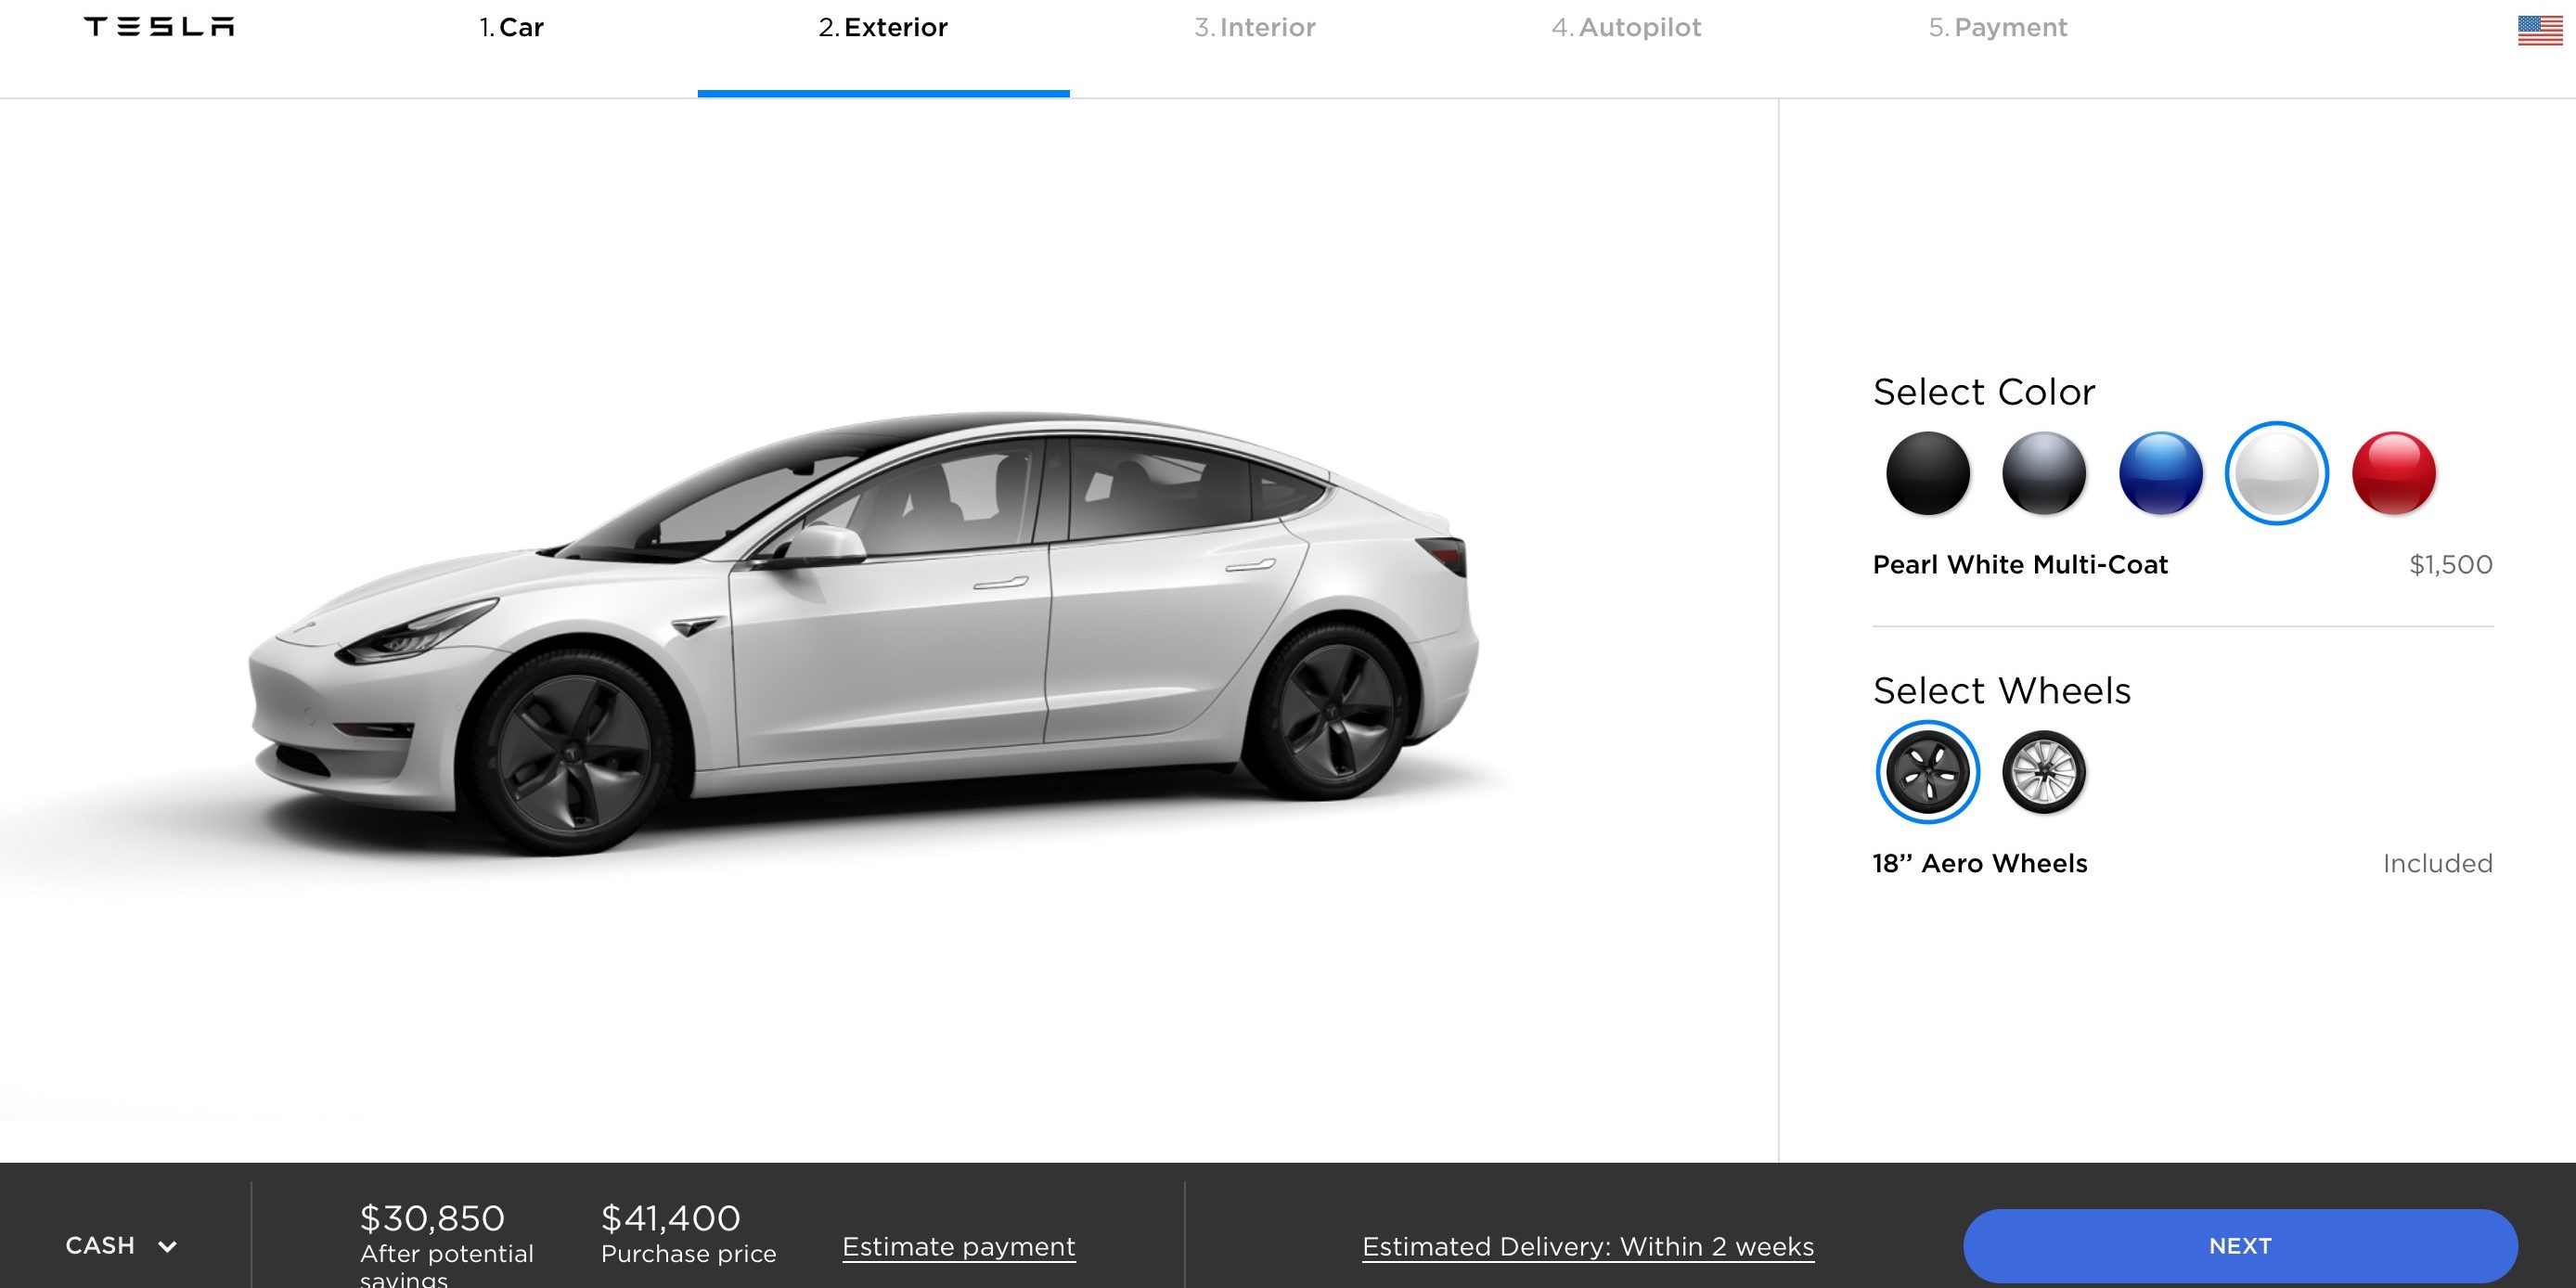 Tesla changes its standard paint color from black to white - Electrek